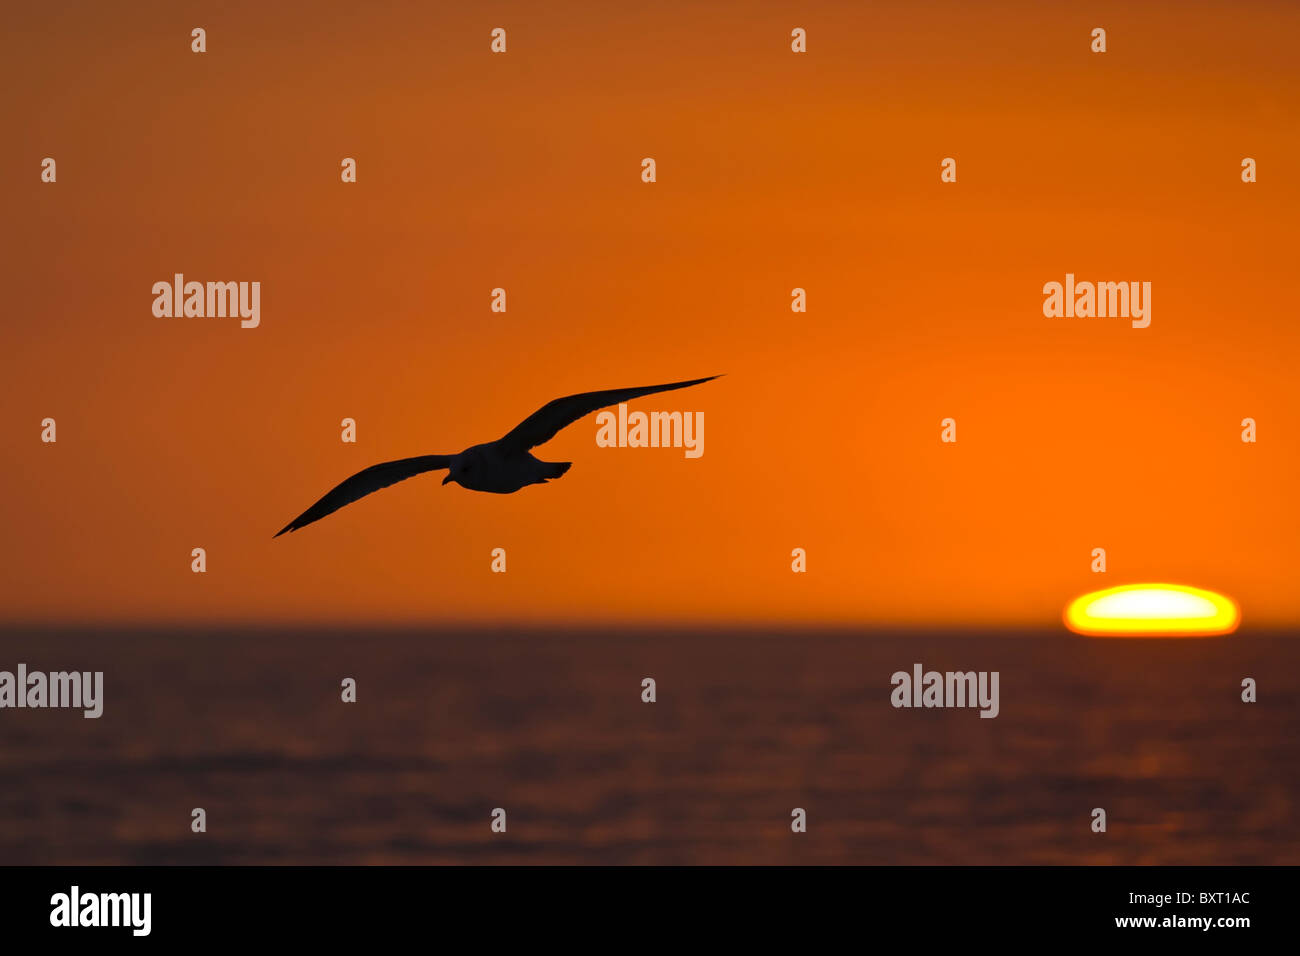 Seagull flying silhouetted aganist orange sunset sky with sun on Gulf of Mexico horizon Stock Photo